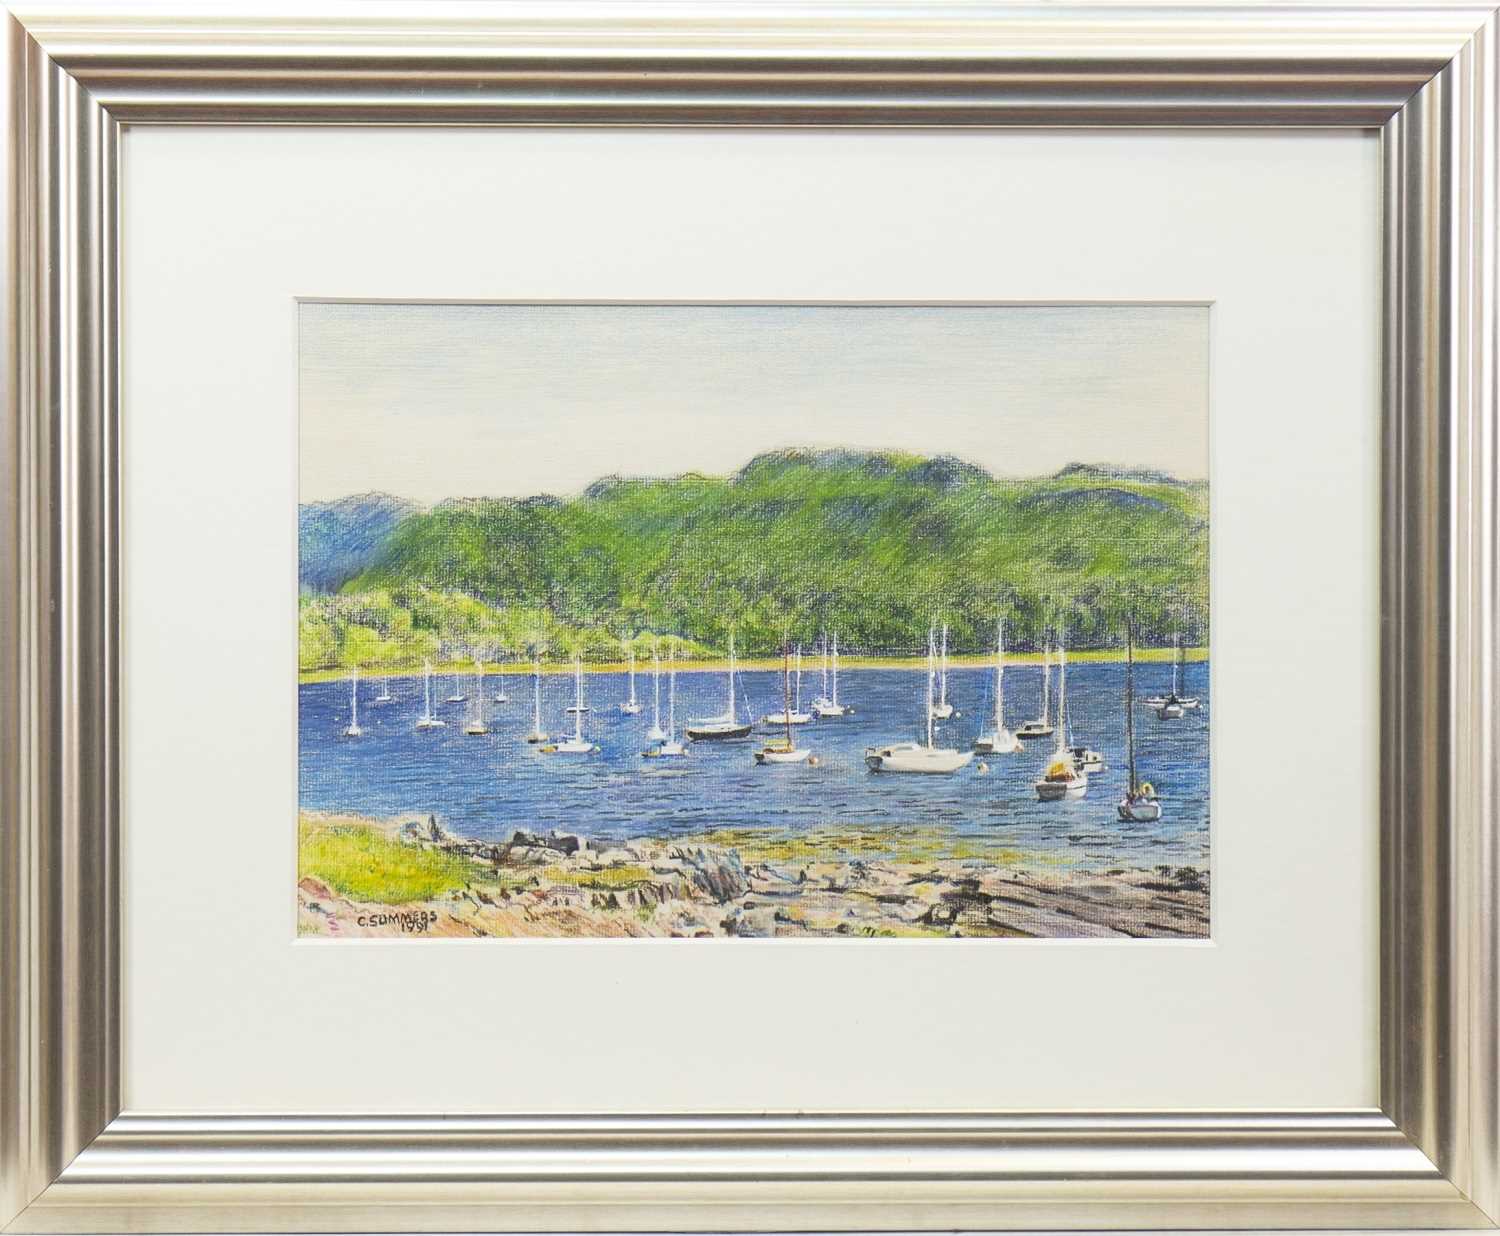 Lot 768 - LOCH SCENE WITH MOORED BOATS, A CRAYON ON BOARD BY C. SUMMERS